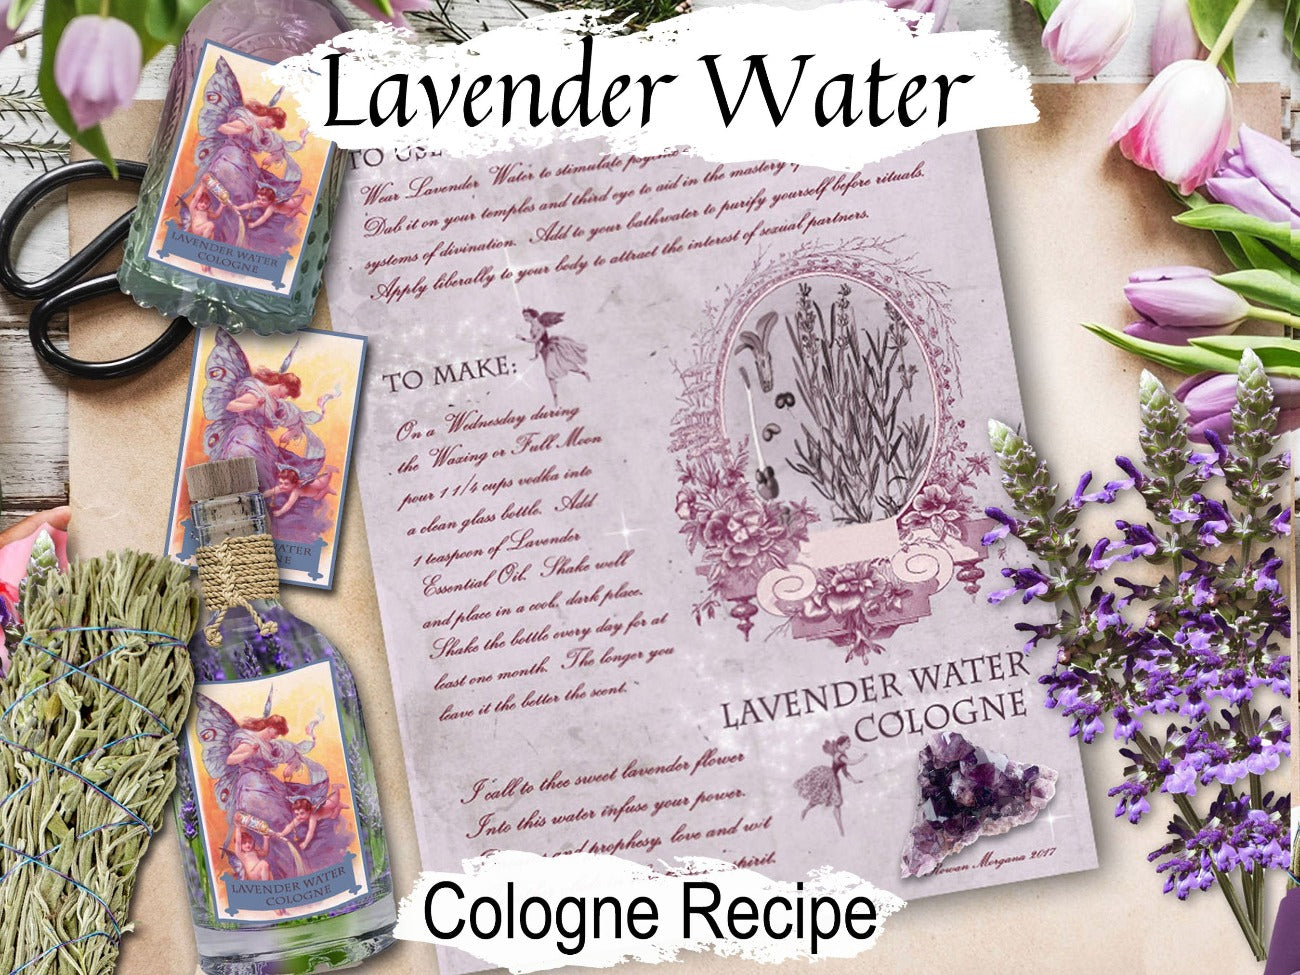 LAVENDER WATER COLOGNE, Recipe & Labels, Wicca Perfume Apothecary, Green Witch Witchcraft Aromatherapy, Kitchen Witch Herbal Apothecary - Morgana Magick Spell